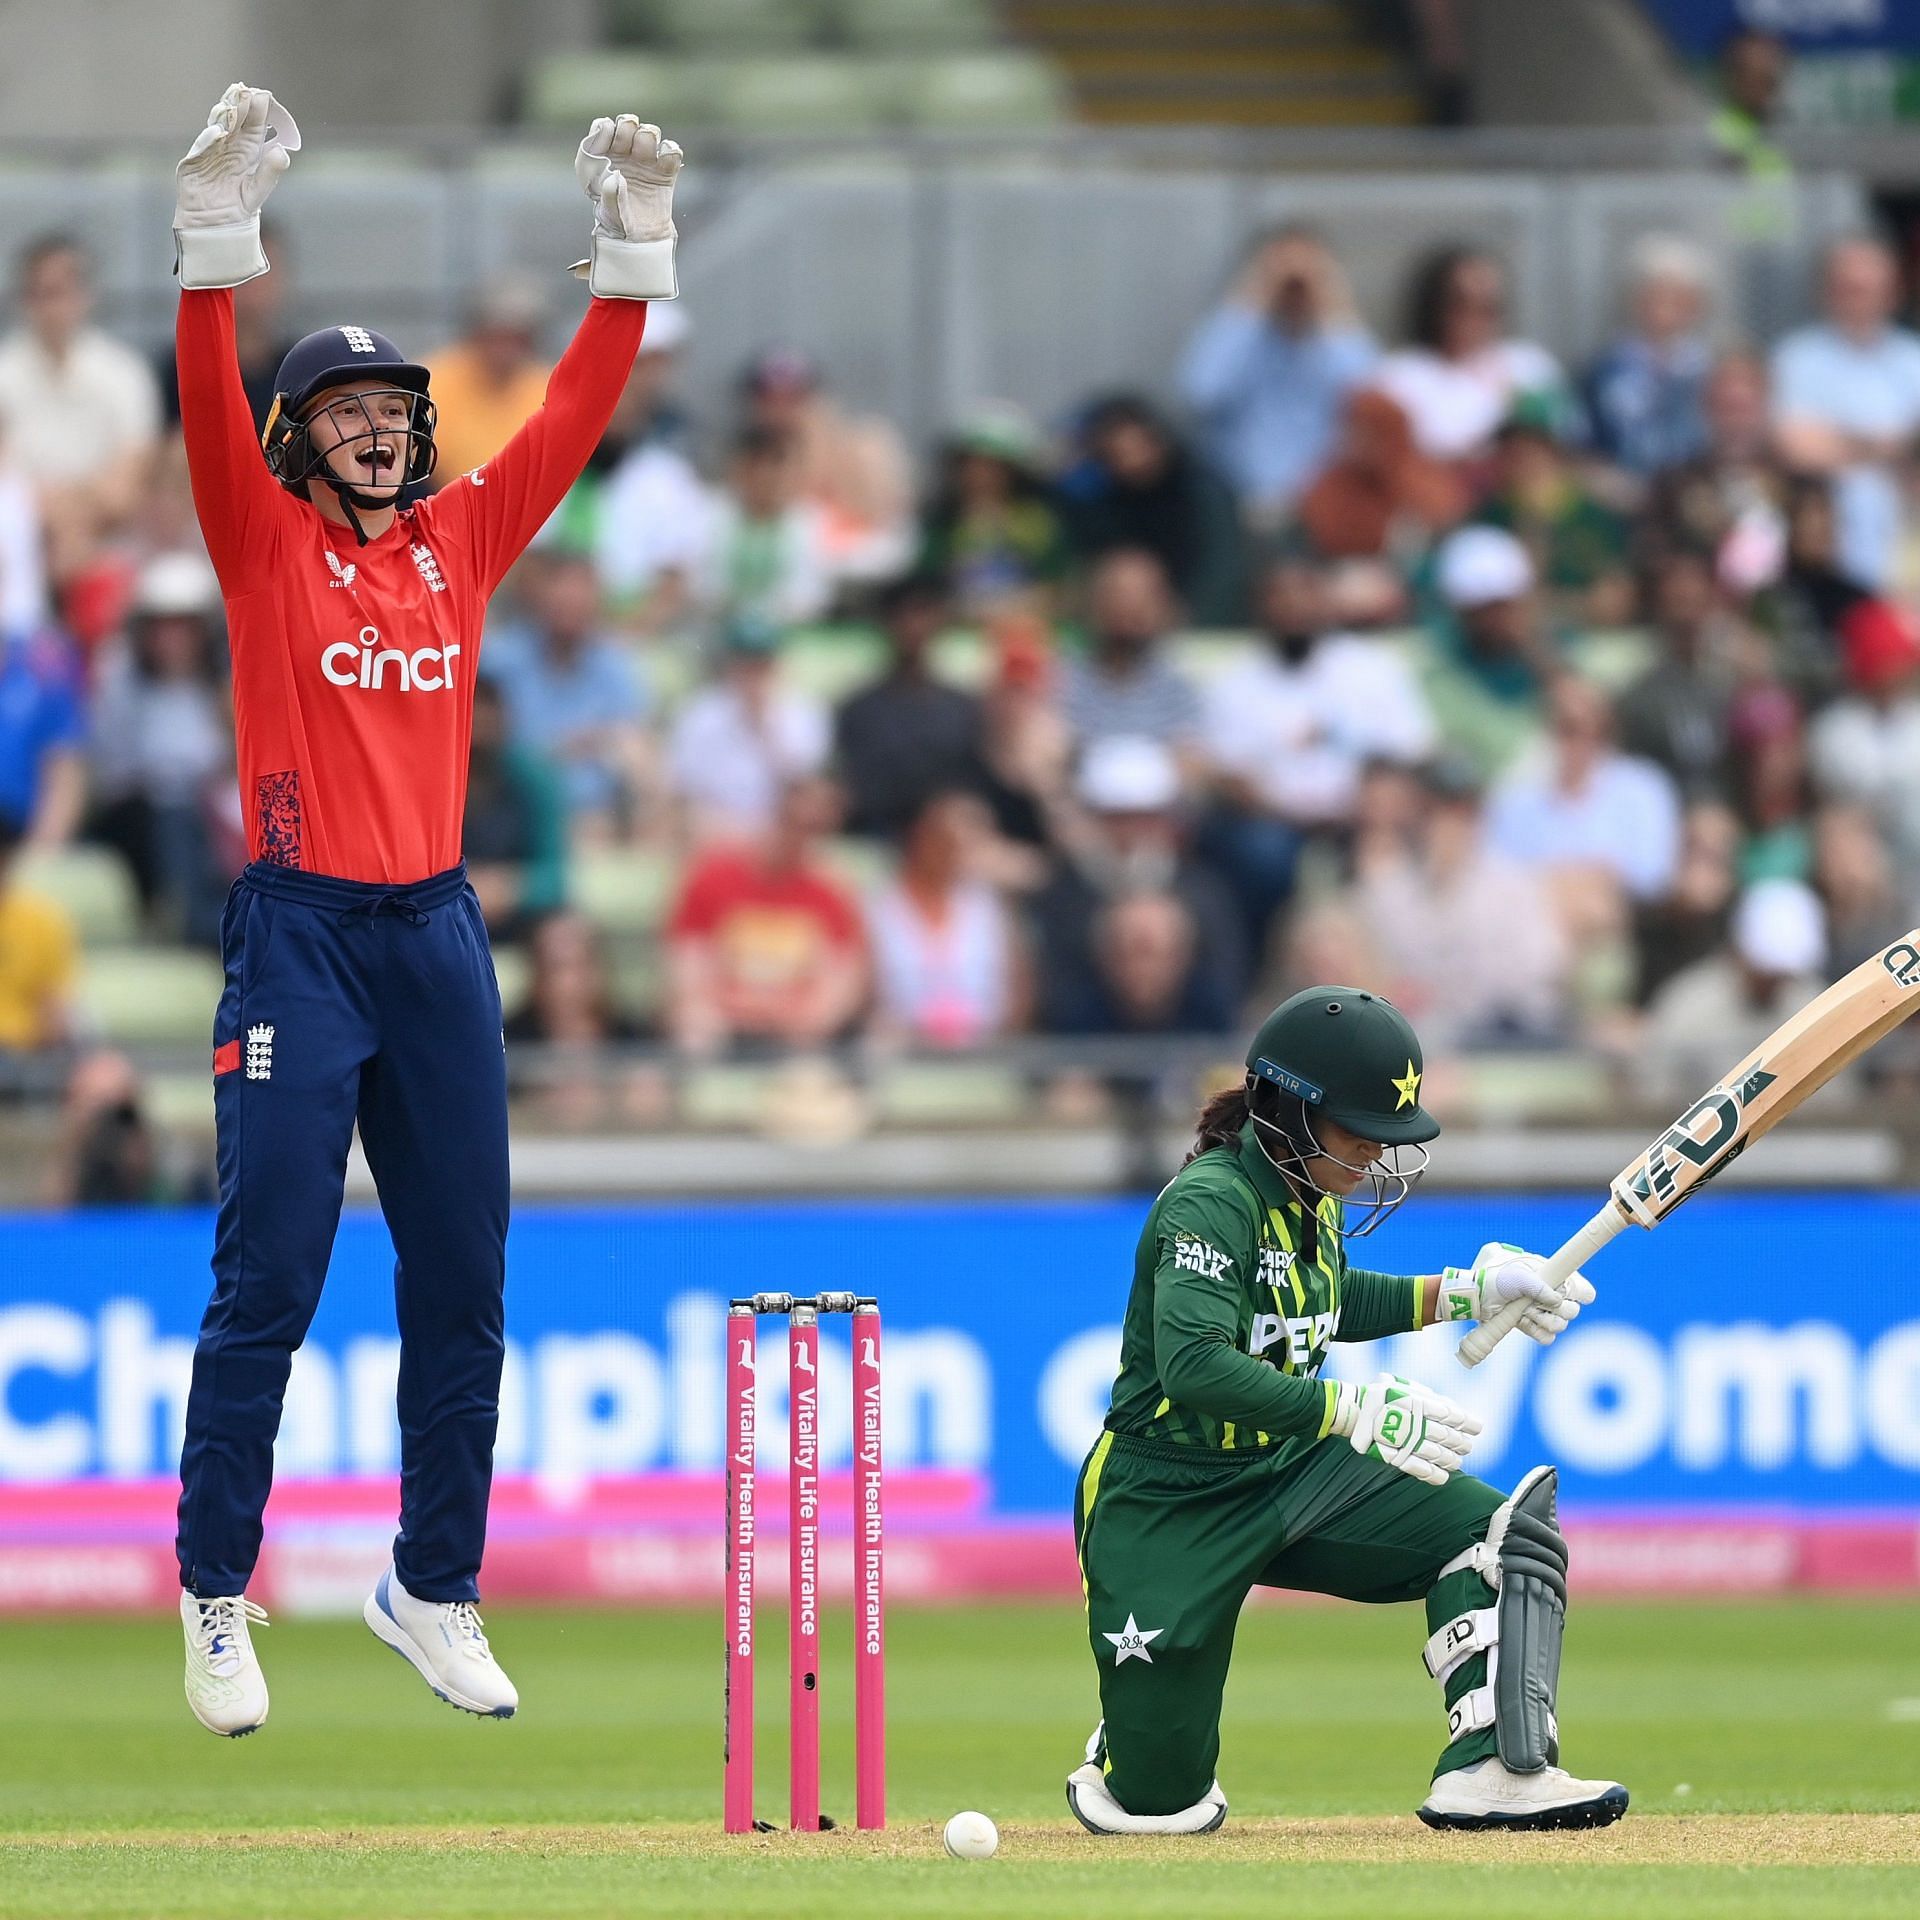 England Women vs Pakistan Women, 2nd T20I: Probable XIs, Match Prediction, Pitch Report, Weather Forecast, Live Streaming Details